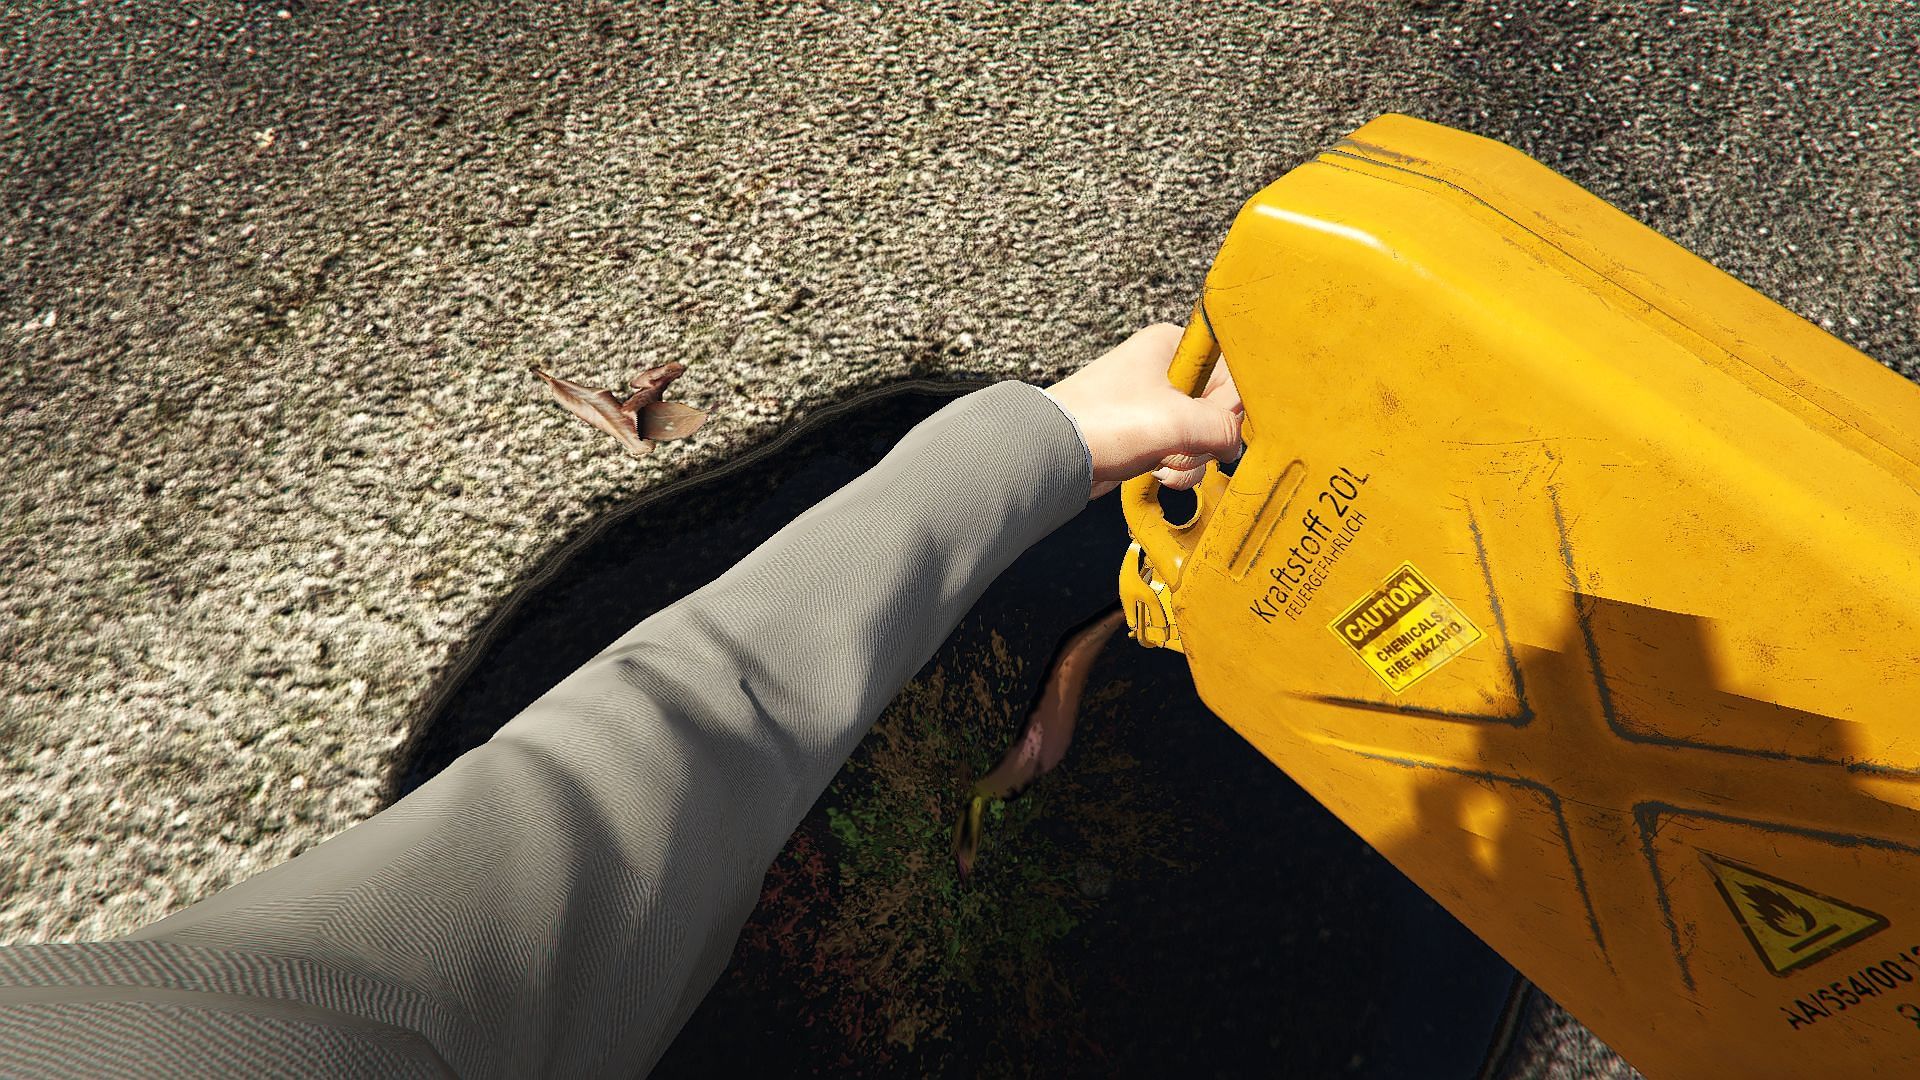 An example of the Hazardous Jerry Can in action (Image via Rockstar Games)